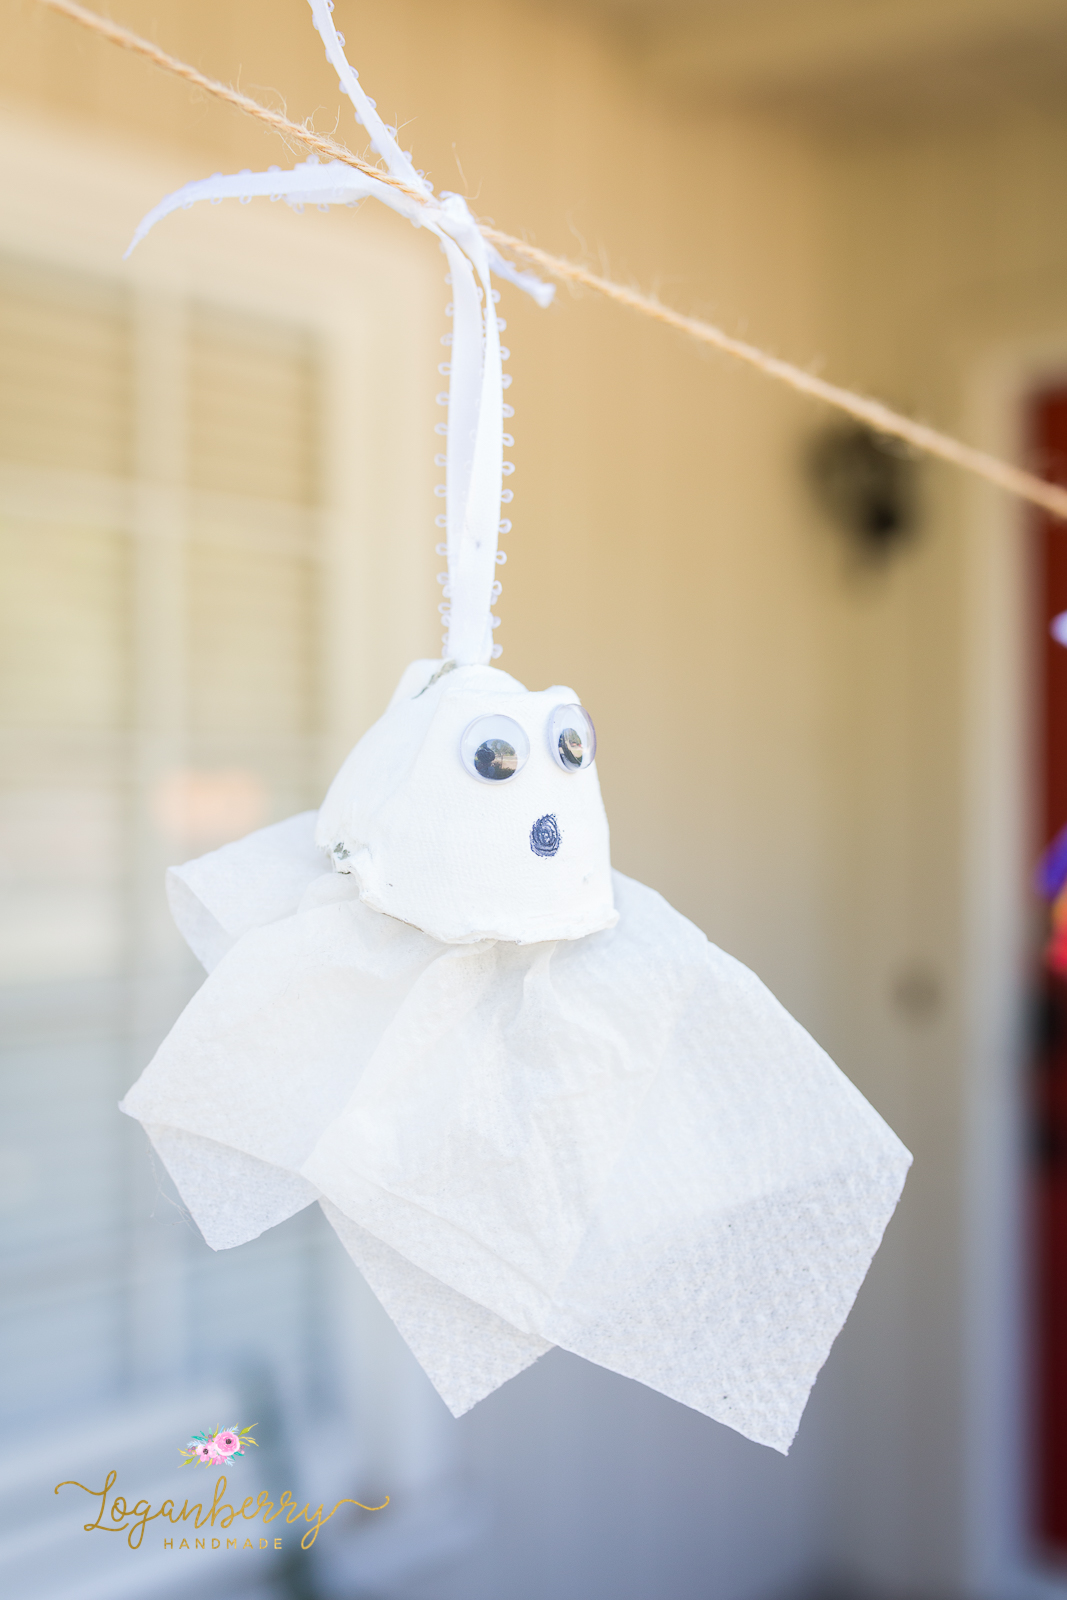 Make Halloween Special with Egg Carton Crafts!